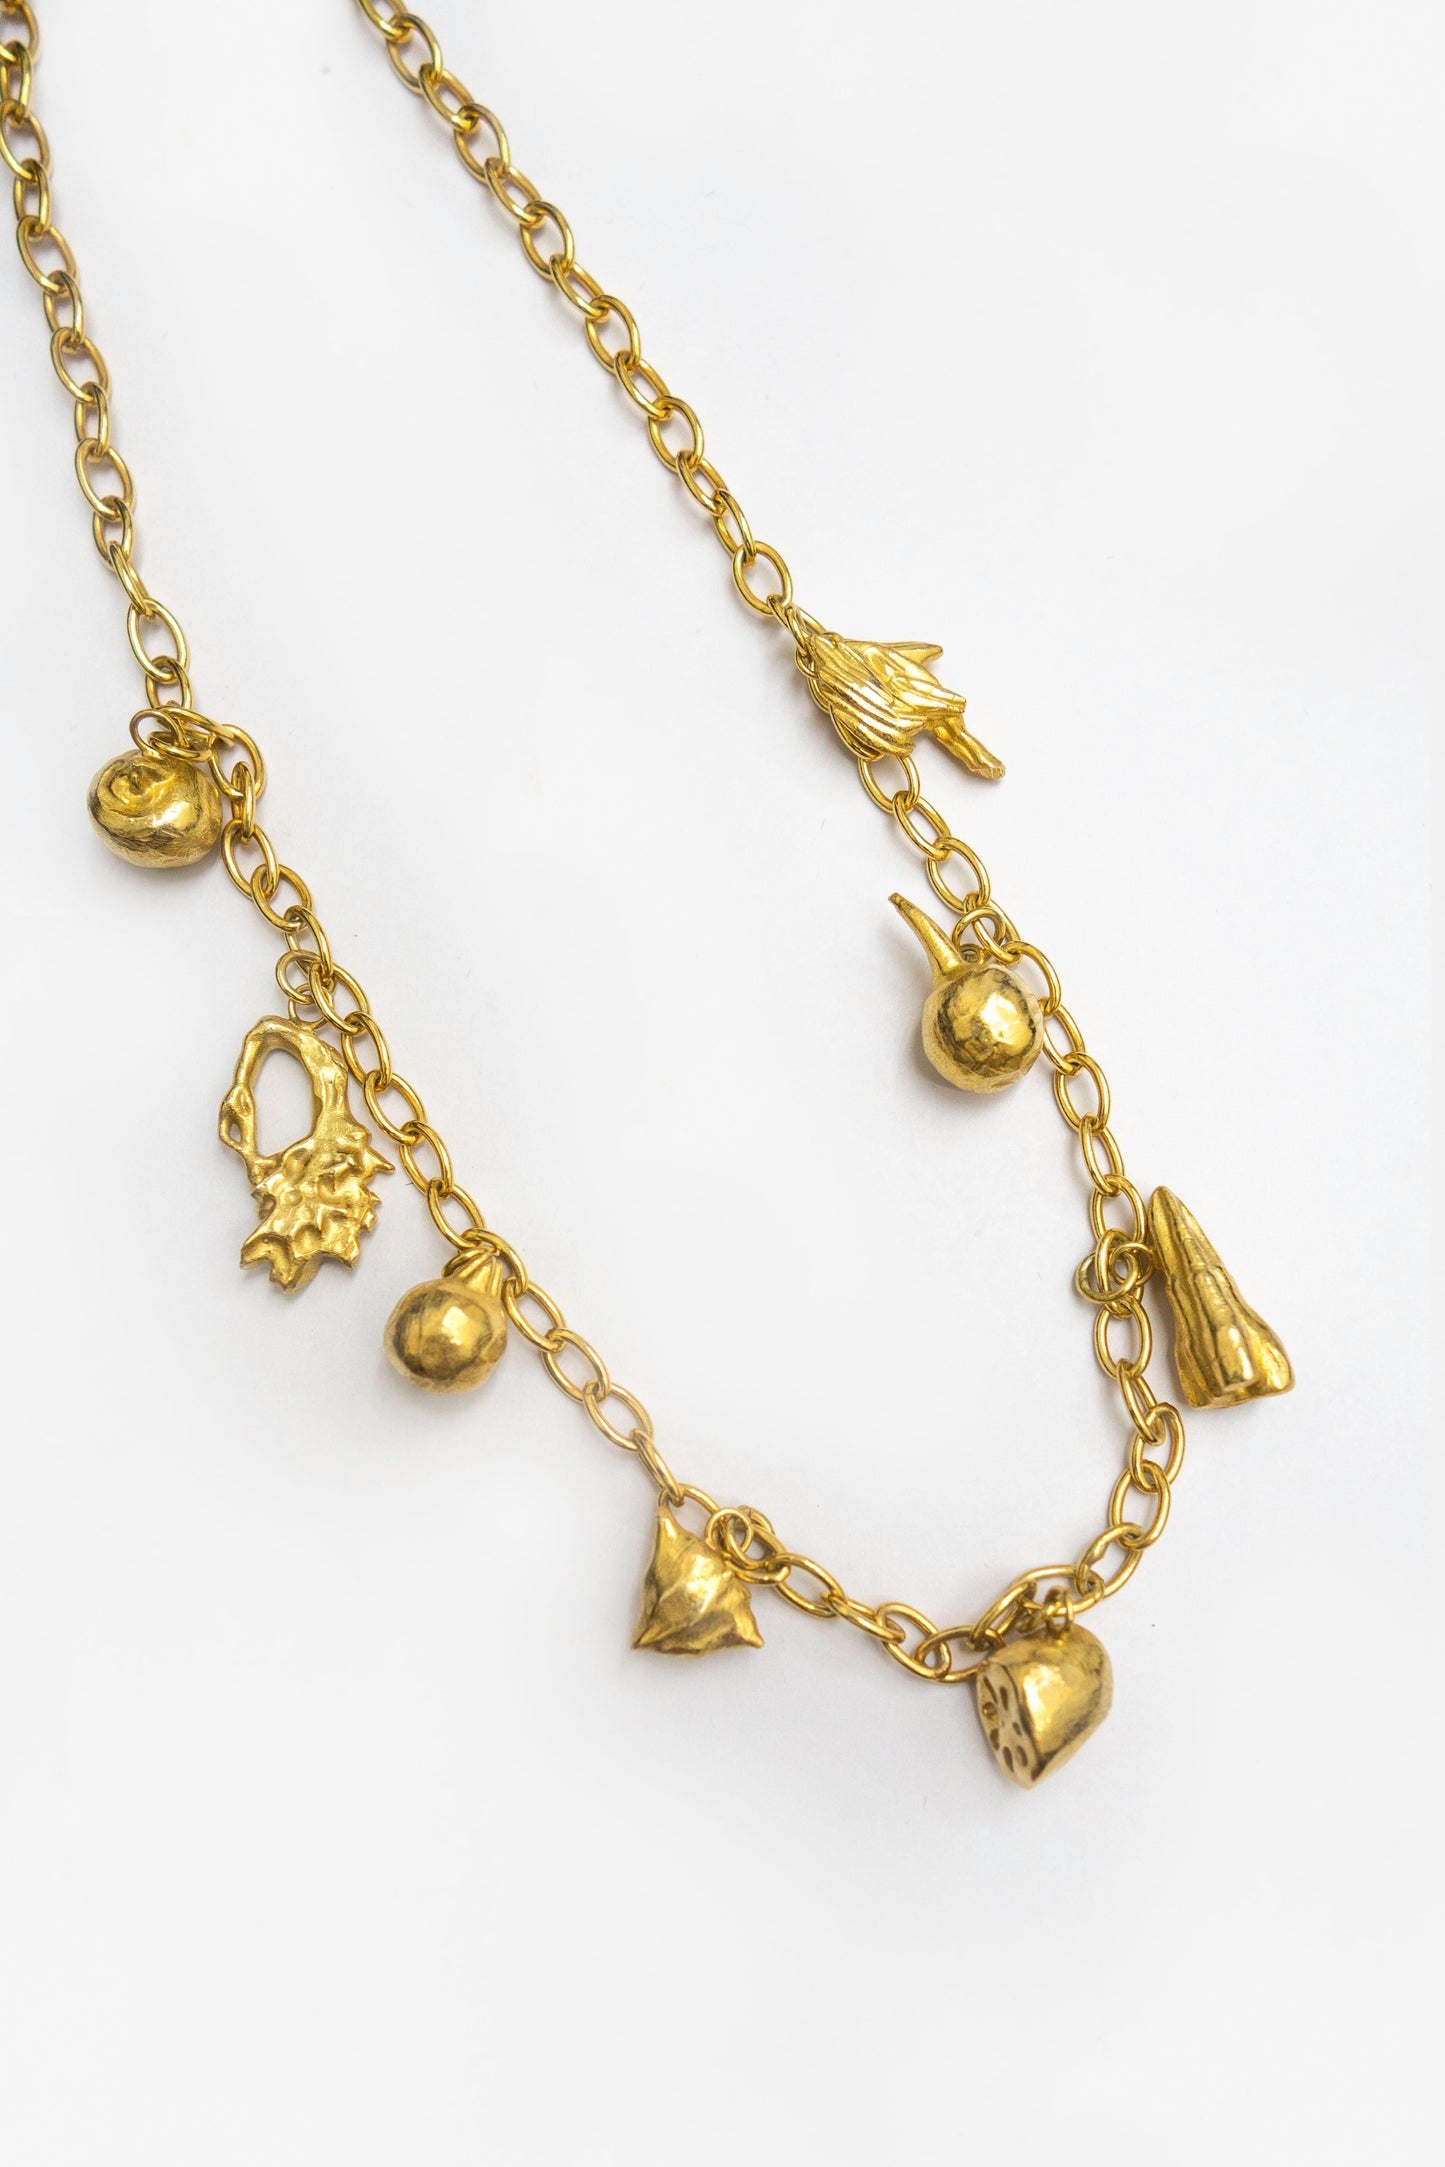 EIGHT IMMORTALS NECKLACE - Cong Yu - {{Jewellery}}